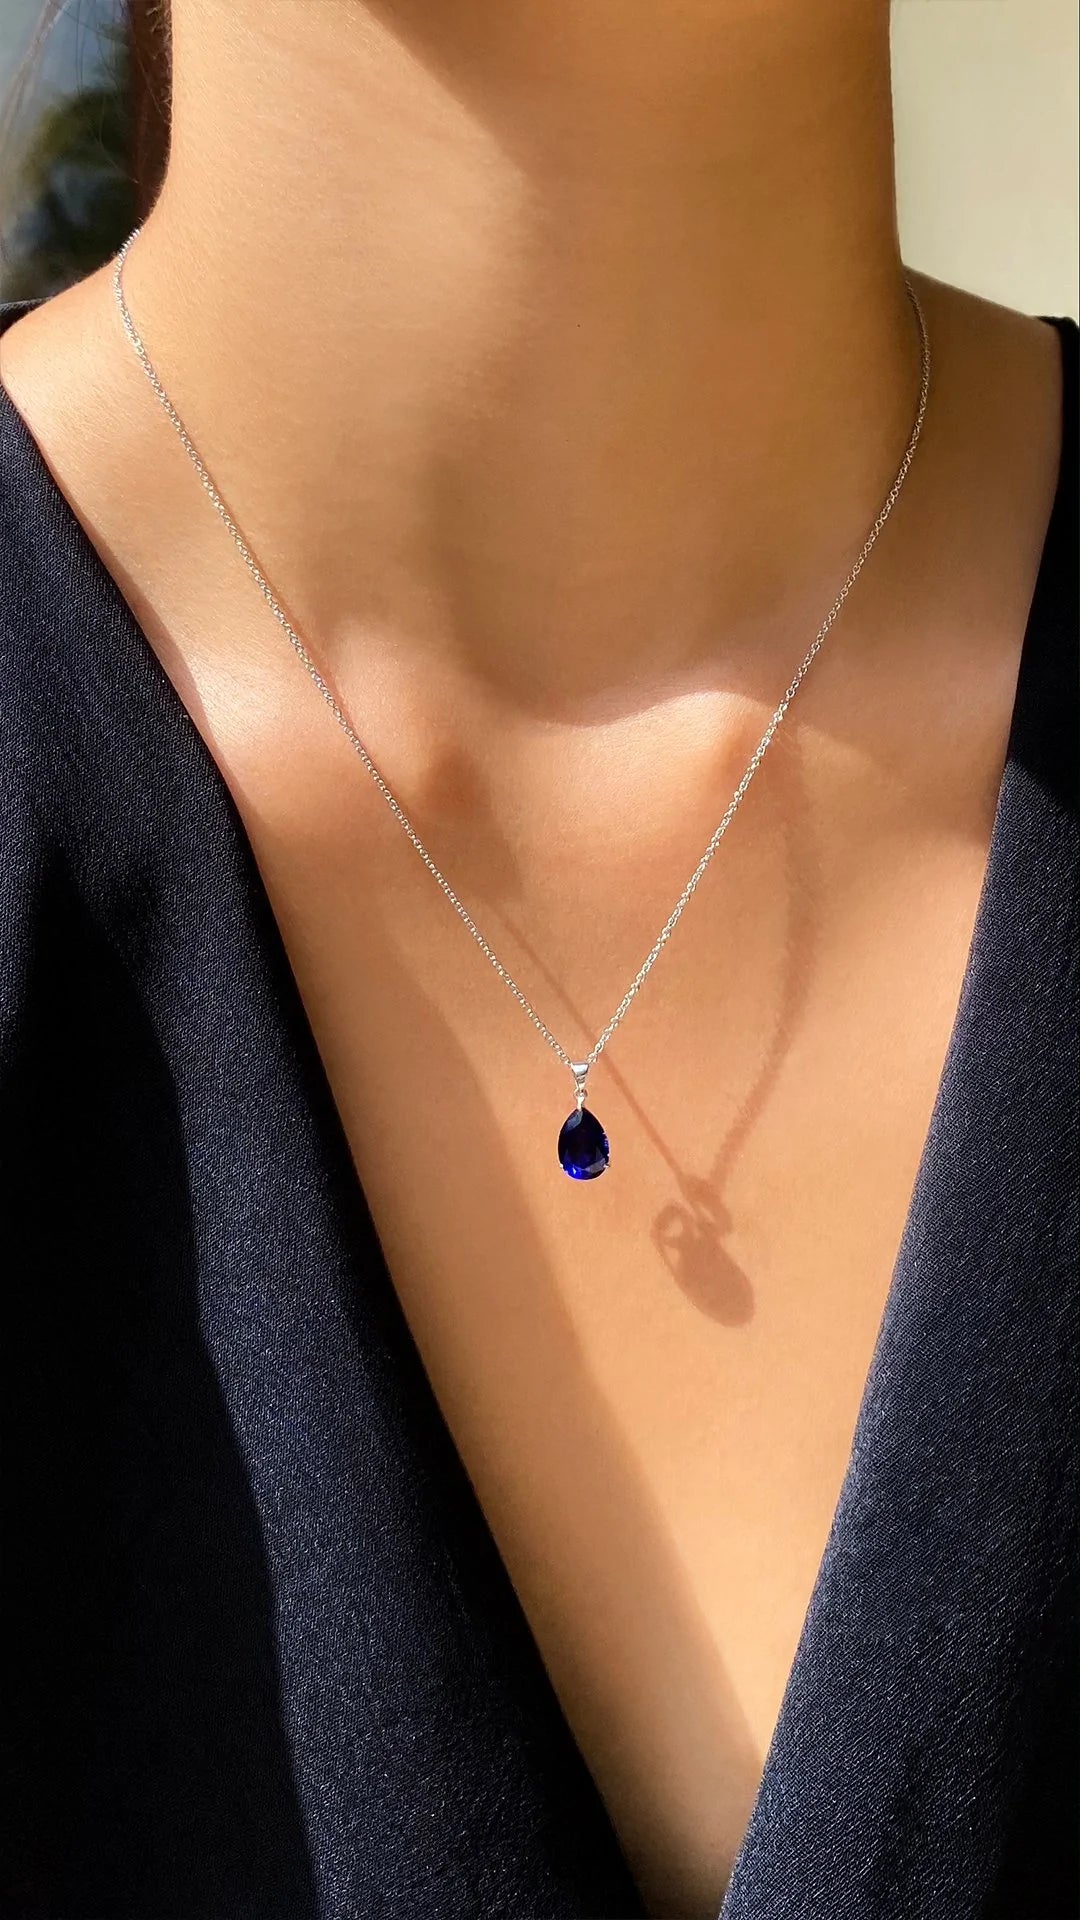 100% Natural Blue Sapphire Necklace For Daily Wear 4mm*5mm Sapphire Silve  Necklace 925 Silver Sapphire Jewelry - Pendants - AliExpress